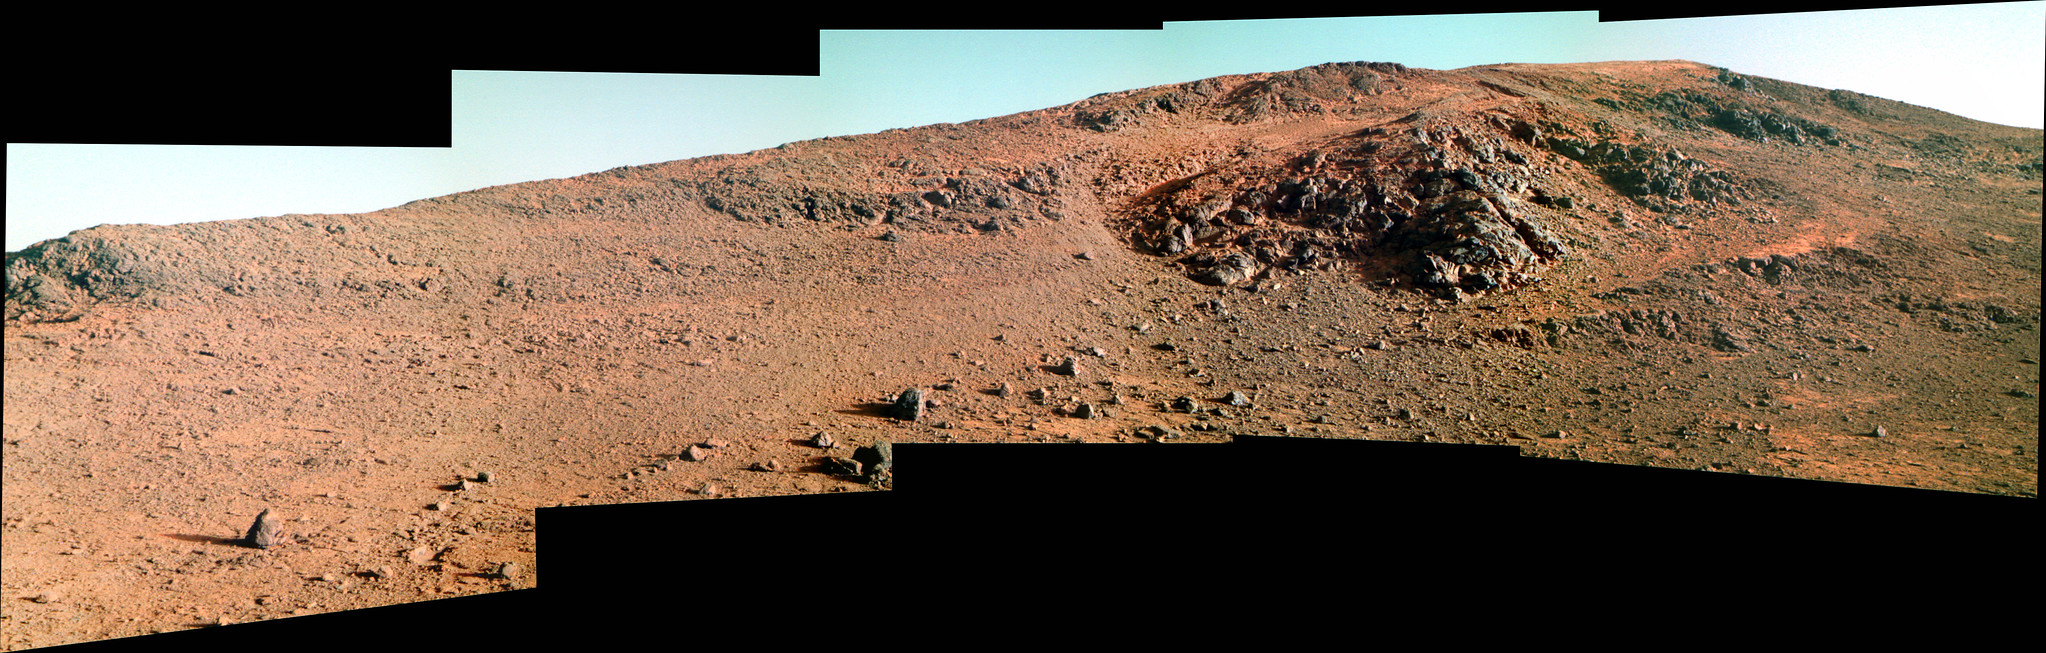 Opportunity  Sol 4182 Sol 4183